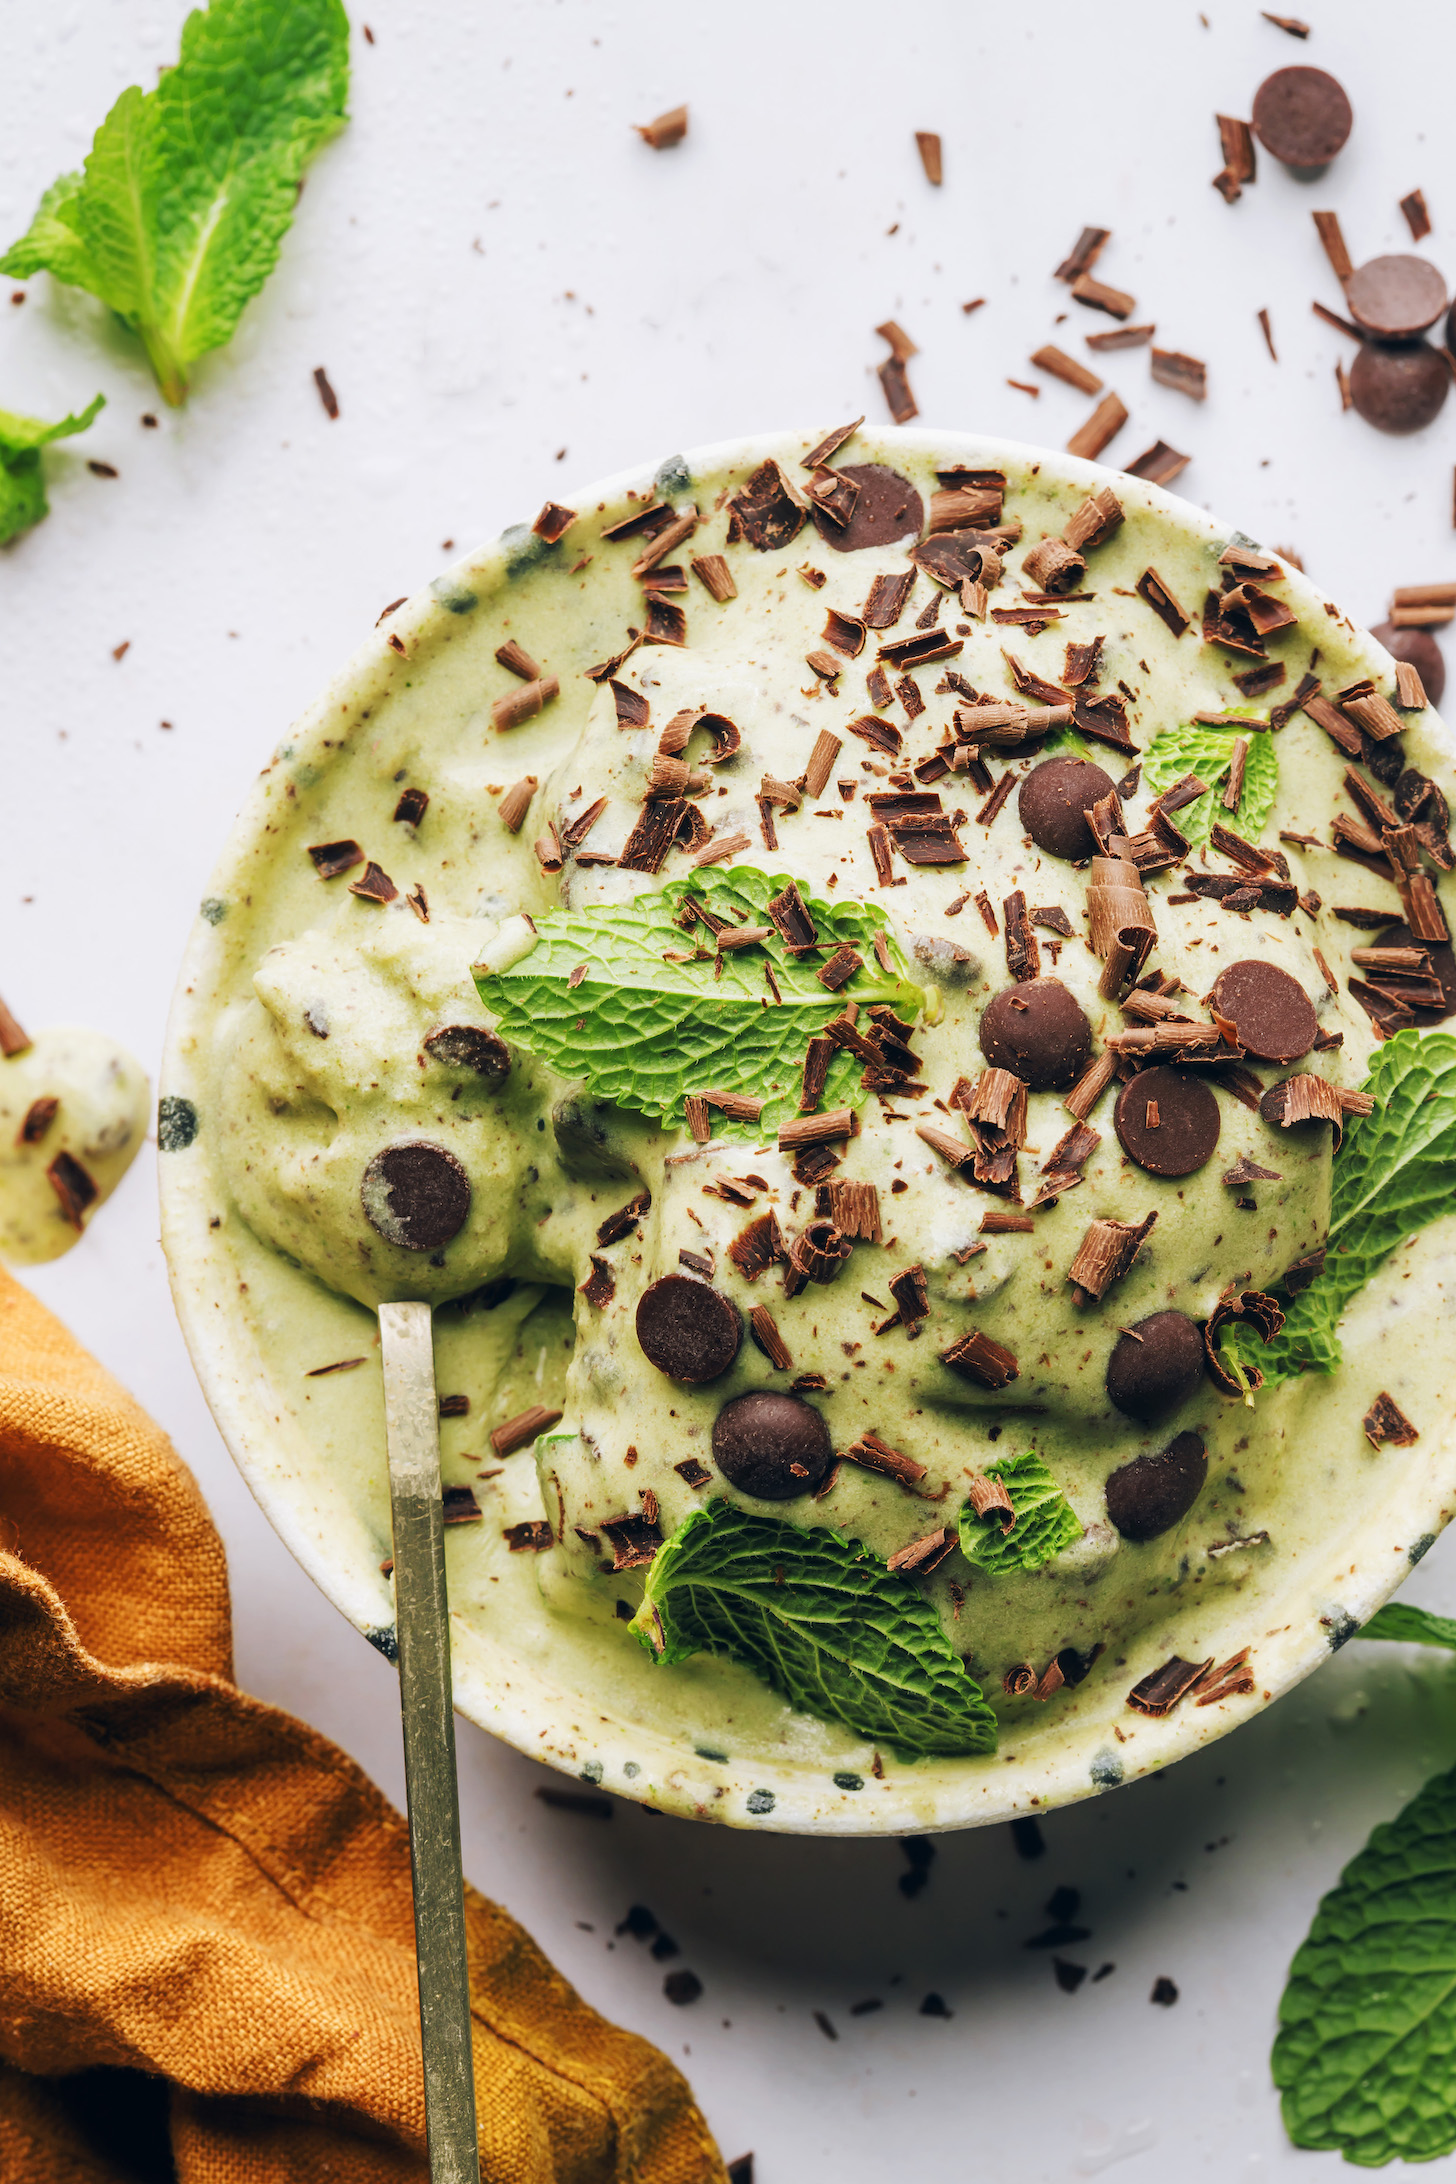 Vegan mint chocolate chip ice cream garnished with chocolate shavings and fresh mint 